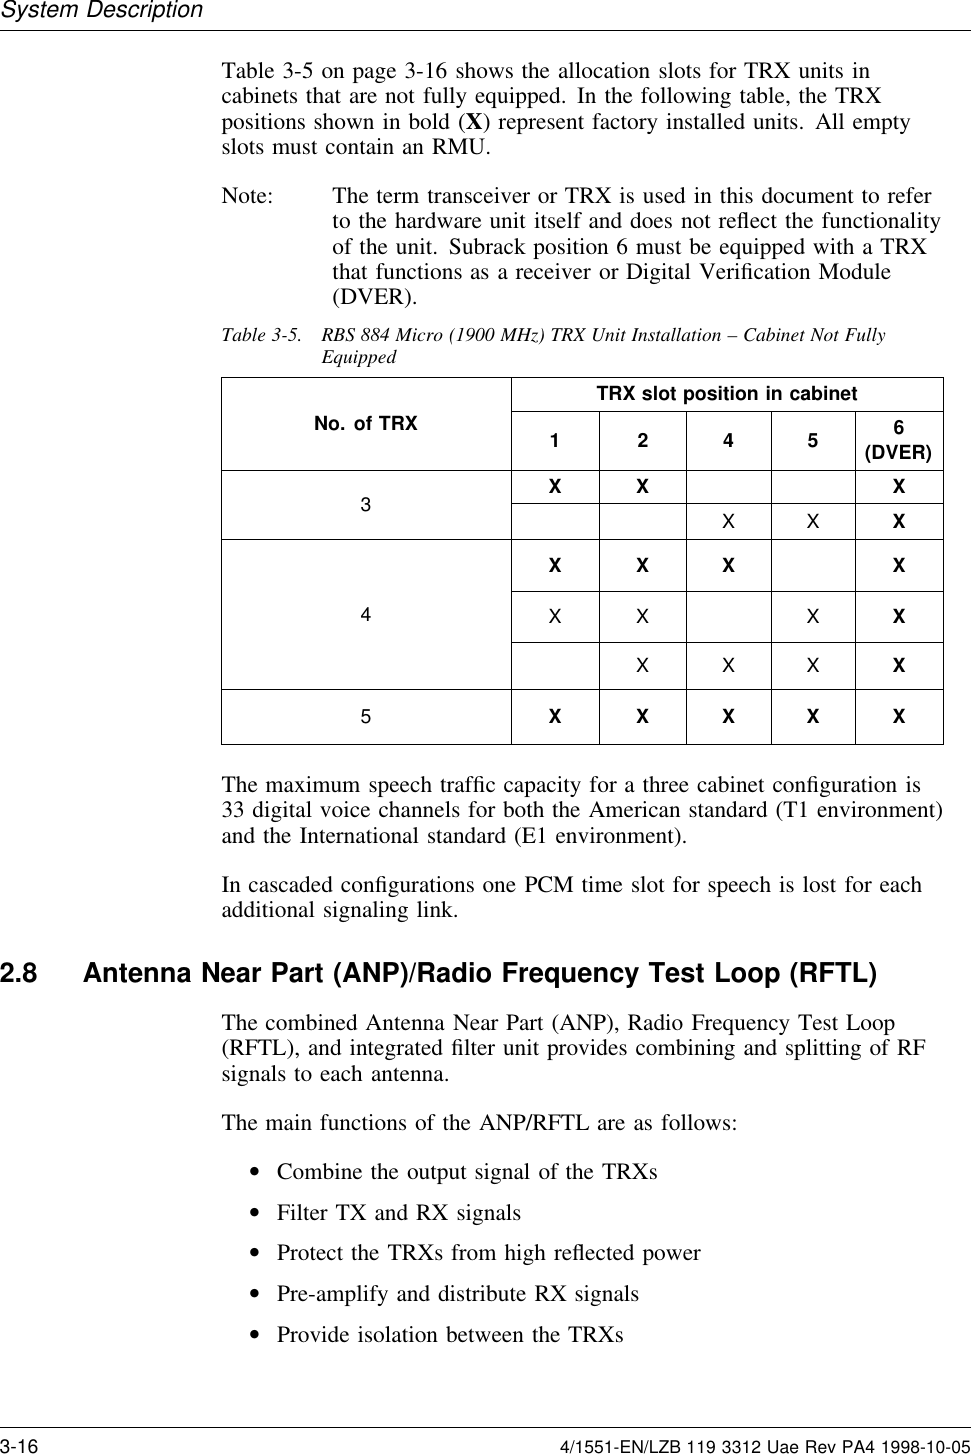 System DescriptionTable 3-5 on page 3-16 shows the allocation slots for TRX units incabinets that are not fully equipped. In the following table, the TRXpositions shown in bold (X) represent factory installed units. All emptyslots must contain an RMU.Note: The term transceiver or TRX is used in this document to referto the hardware unit itself and does not reﬂect the functionalityof the unit. Subrack position 6 must be equipped with a TRXthat functions as a receiver or Digital Veriﬁcation Module(DVER).Table 3-5. RBS 884 Micro (1900 MHz) TRX Unit Installation – Cabinet Not FullyEquippedTRX slot position in cabinetNo. of TRX 1 2 4 5 6(DVER)X X X3X X XX X X XX X X X4XXXX5X X X X XThe maximum speech trafﬁc capacity for a three cabinet conﬁguration is33 digital voice channels for both the American standard (T1 environment)and the International standard (E1 environment).In cascaded conﬁgurations one PCM time slot for speech is lost for eachadditional signaling link.2.8 Antenna Near Part (ANP)/Radio Frequency Test Loop (RFTL)The combined Antenna Near Part (ANP), Radio Frequency Test Loop(RFTL), and integrated ﬁlter unit provides combining and splitting of RFsignals to each antenna.The main functions of the ANP/RFTL are as follows:•Combine the output signal of the TRXs•Filter TX and RX signals•Protect the TRXs from high reﬂected power•Pre-amplify and distribute RX signals•Provide isolation between the TRXs3-16 4/1551-EN/LZB 119 3312 Uae Rev PA4 1998-10-05